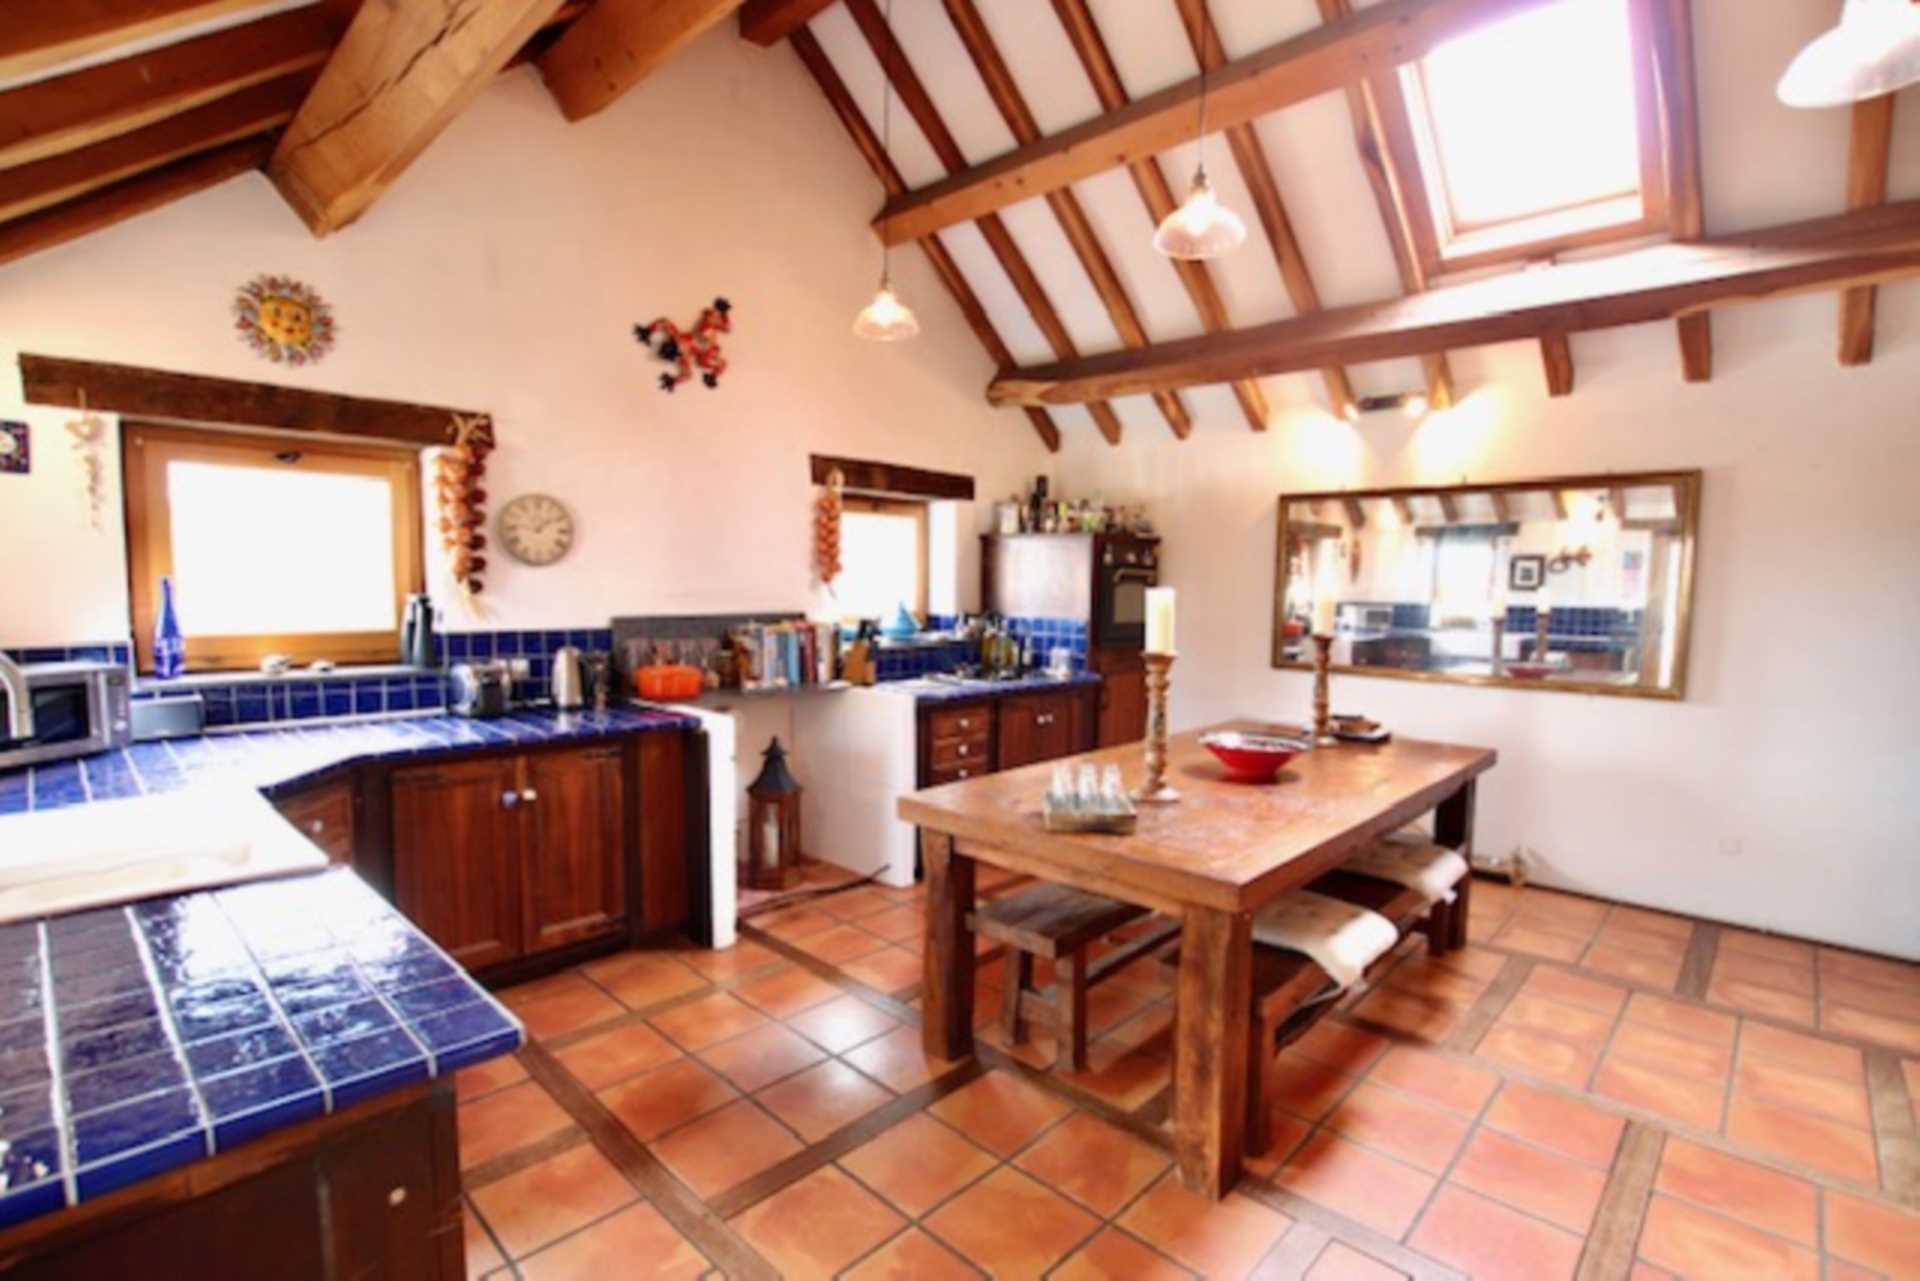 Dordogne, France unspoilt beauty, private, peaceful, tranquil  and has been a labour of Love 649 Euros UNDER OFFER, Image 11